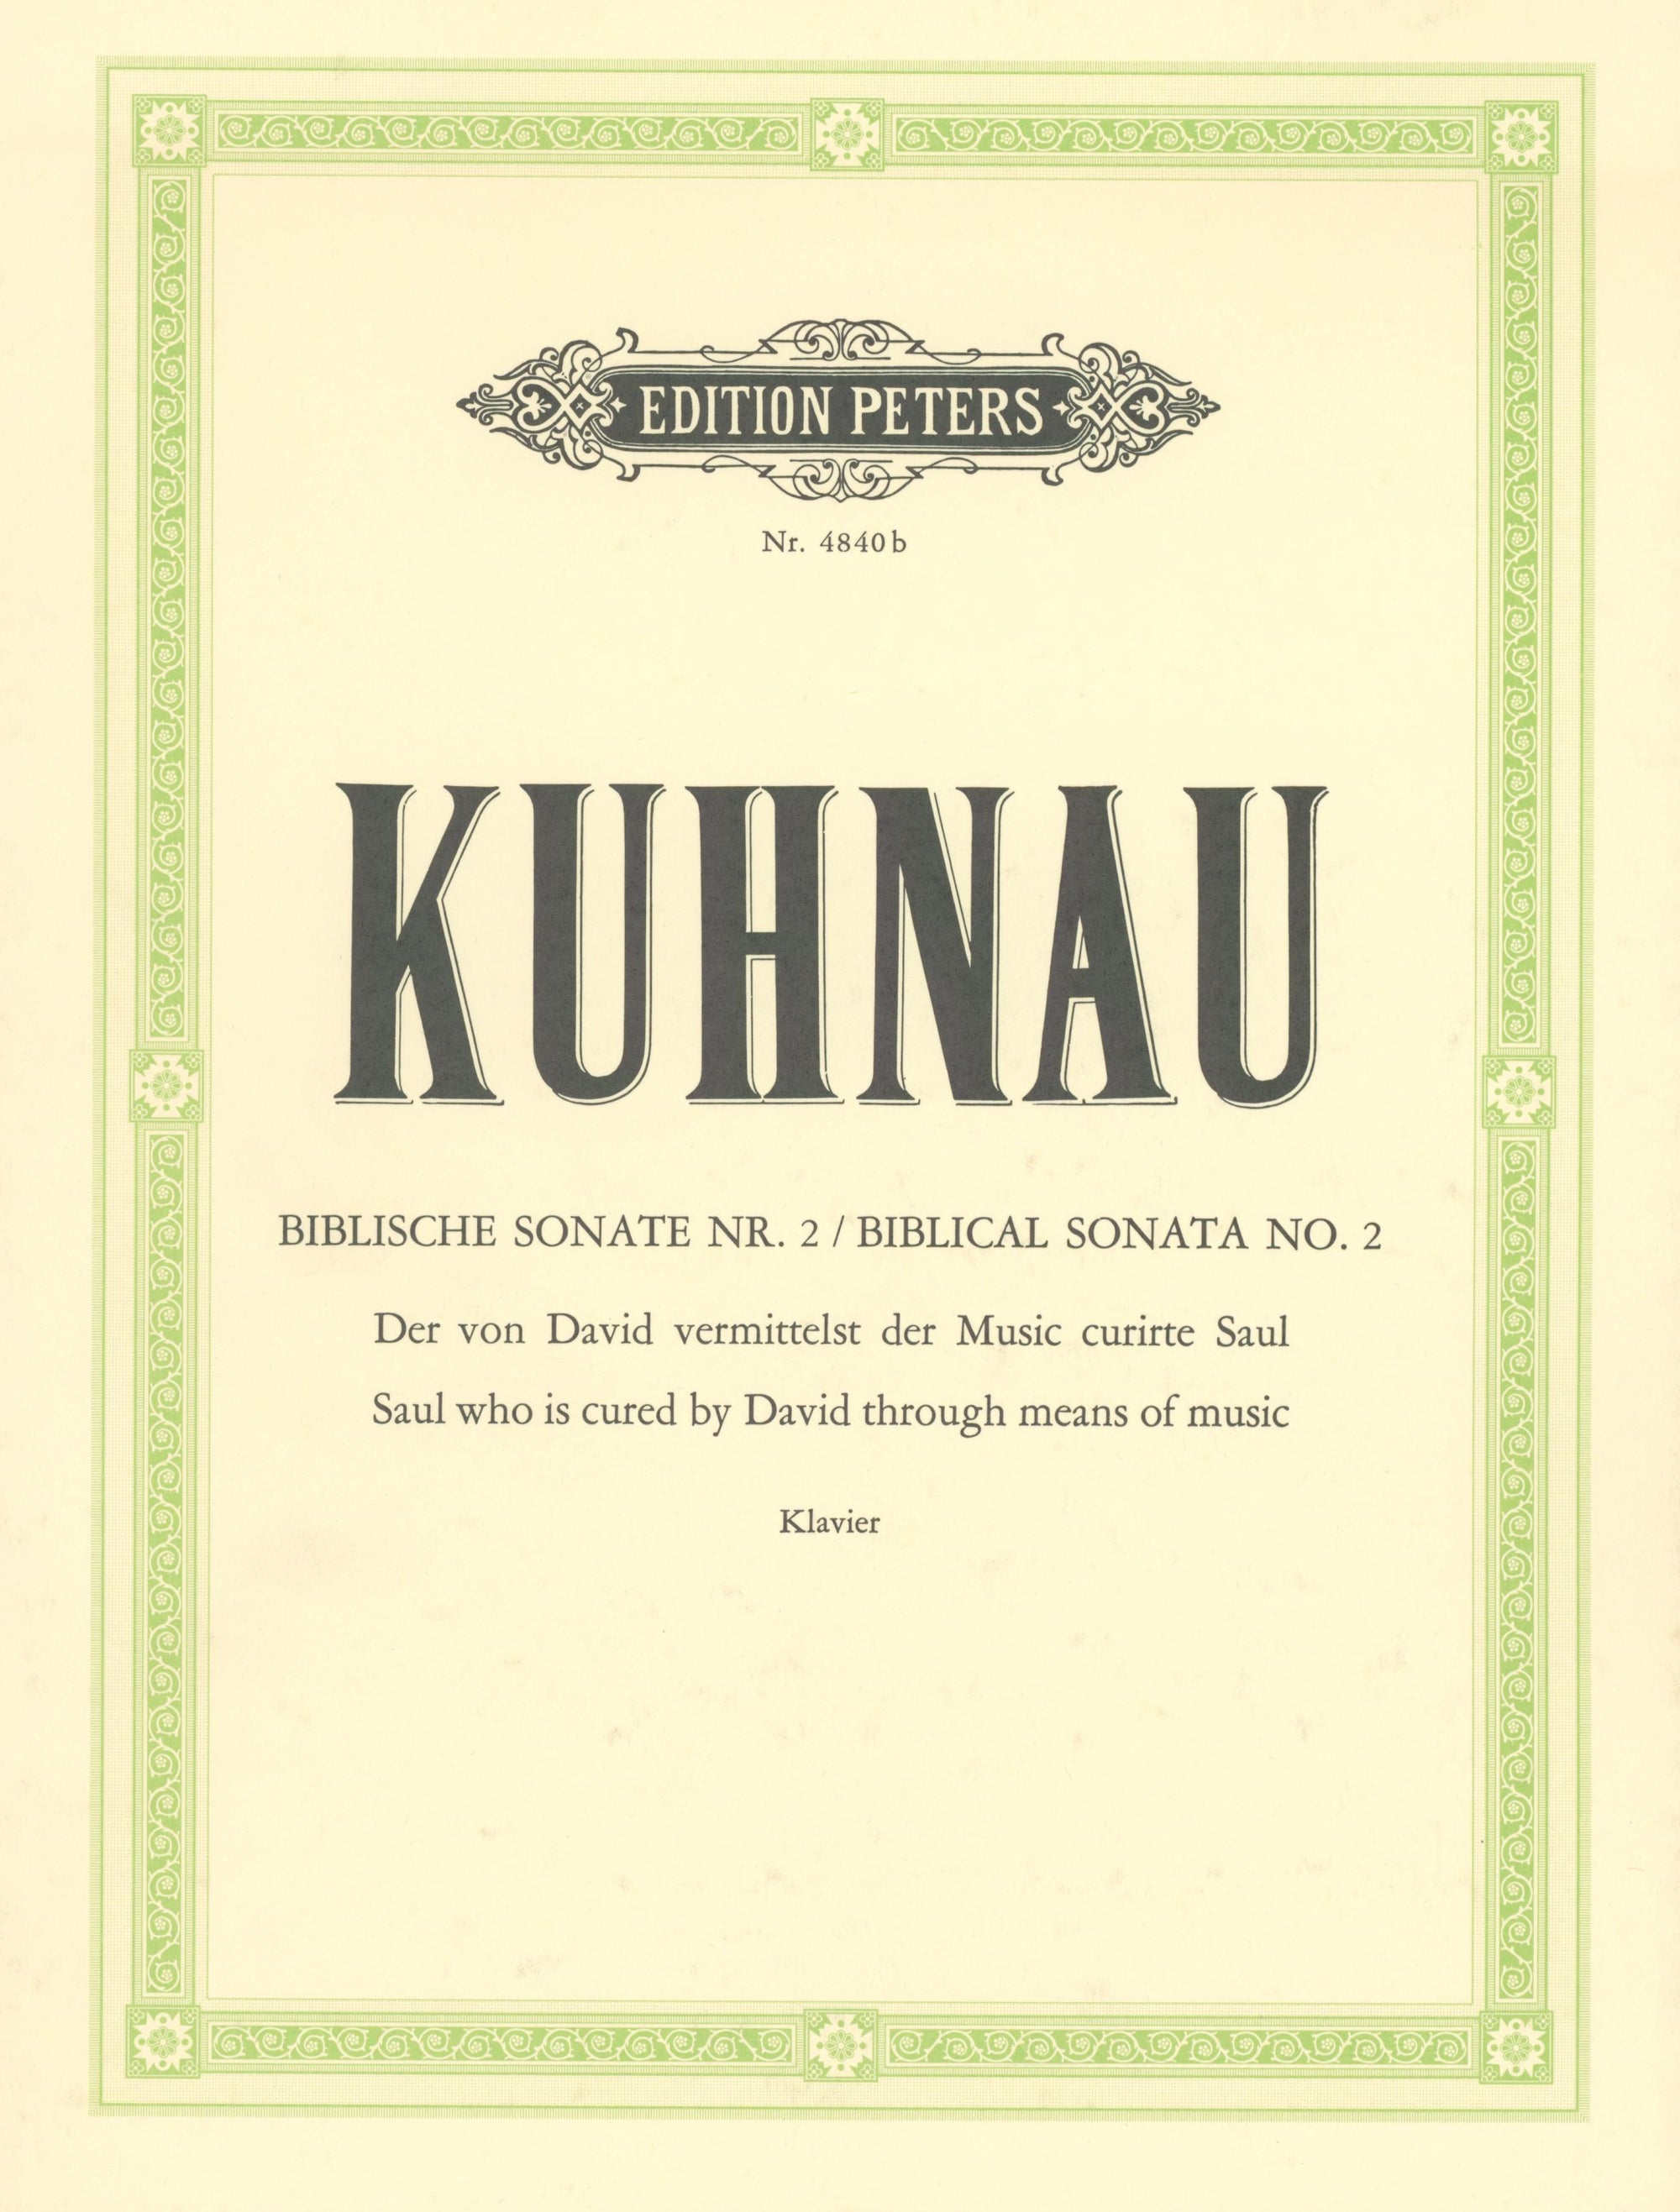 Kuhnau: Saul is Cured by David by Means of Music